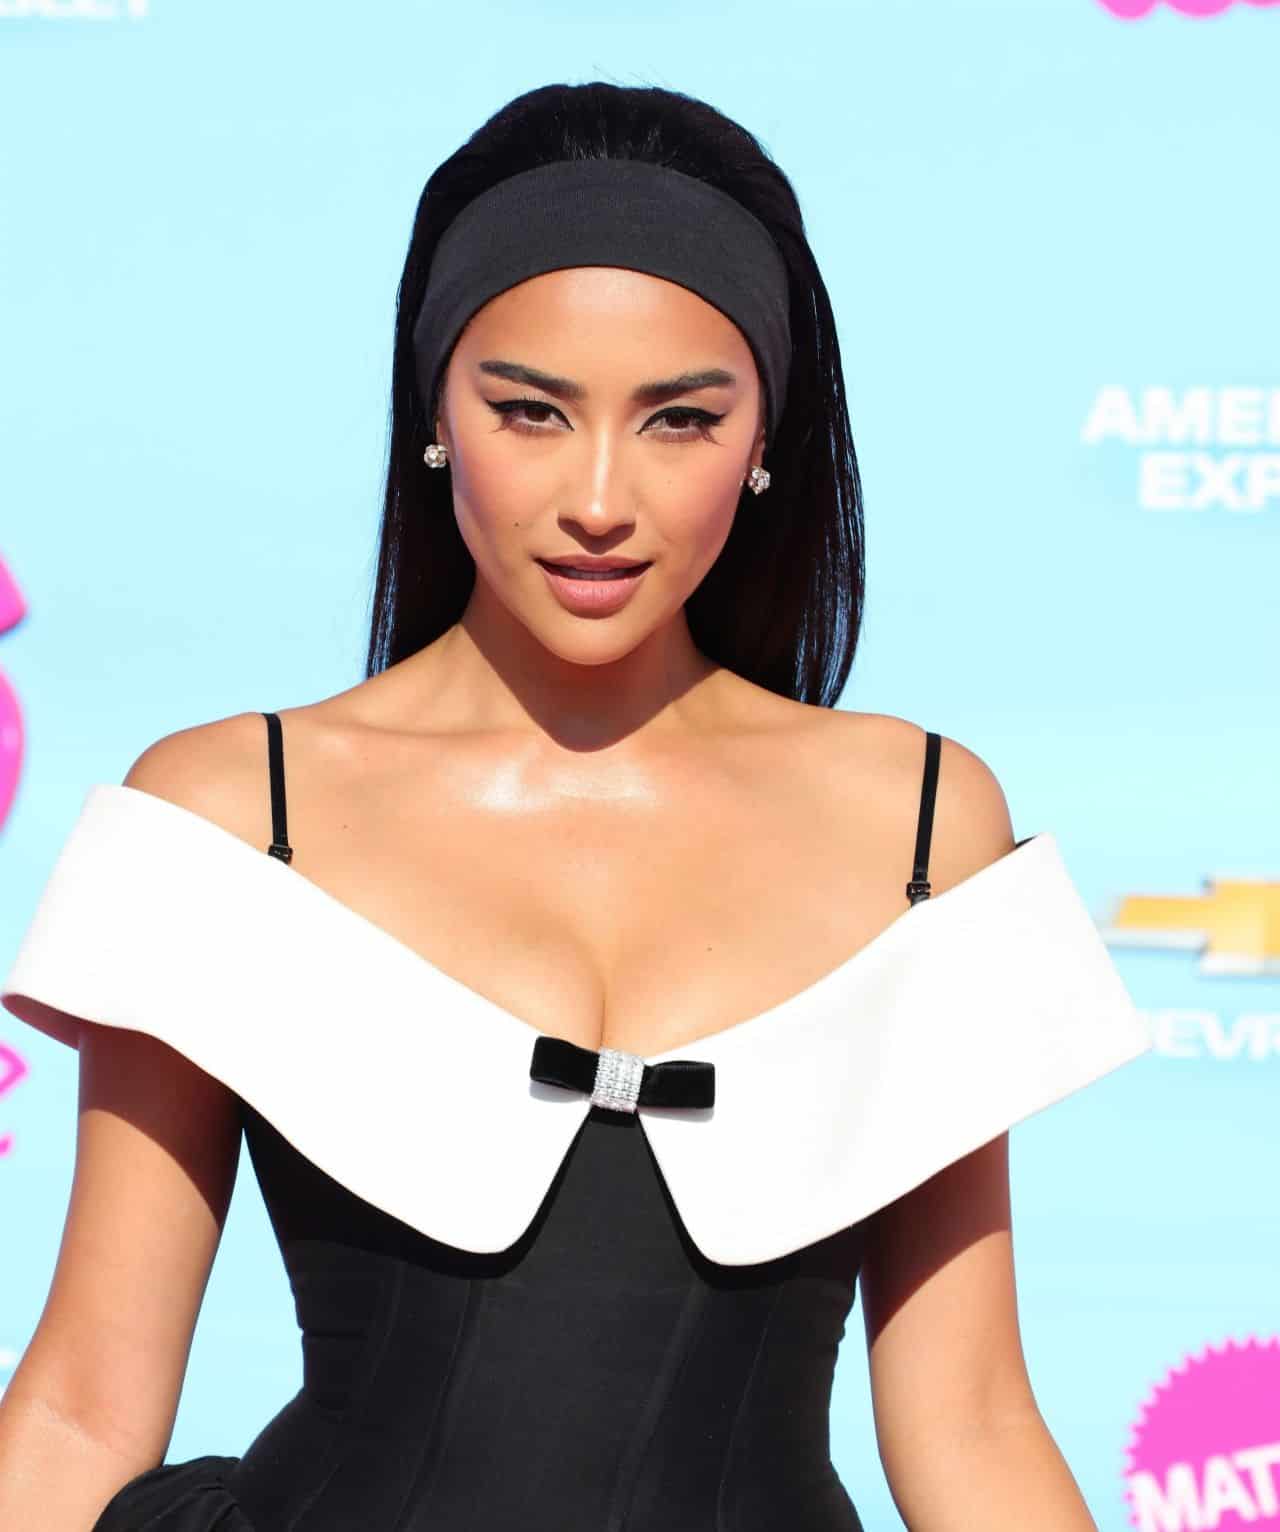 Shay Mitchell Flatters Her Figure in Shushu/Tong Dress at "Barbie" Premiere